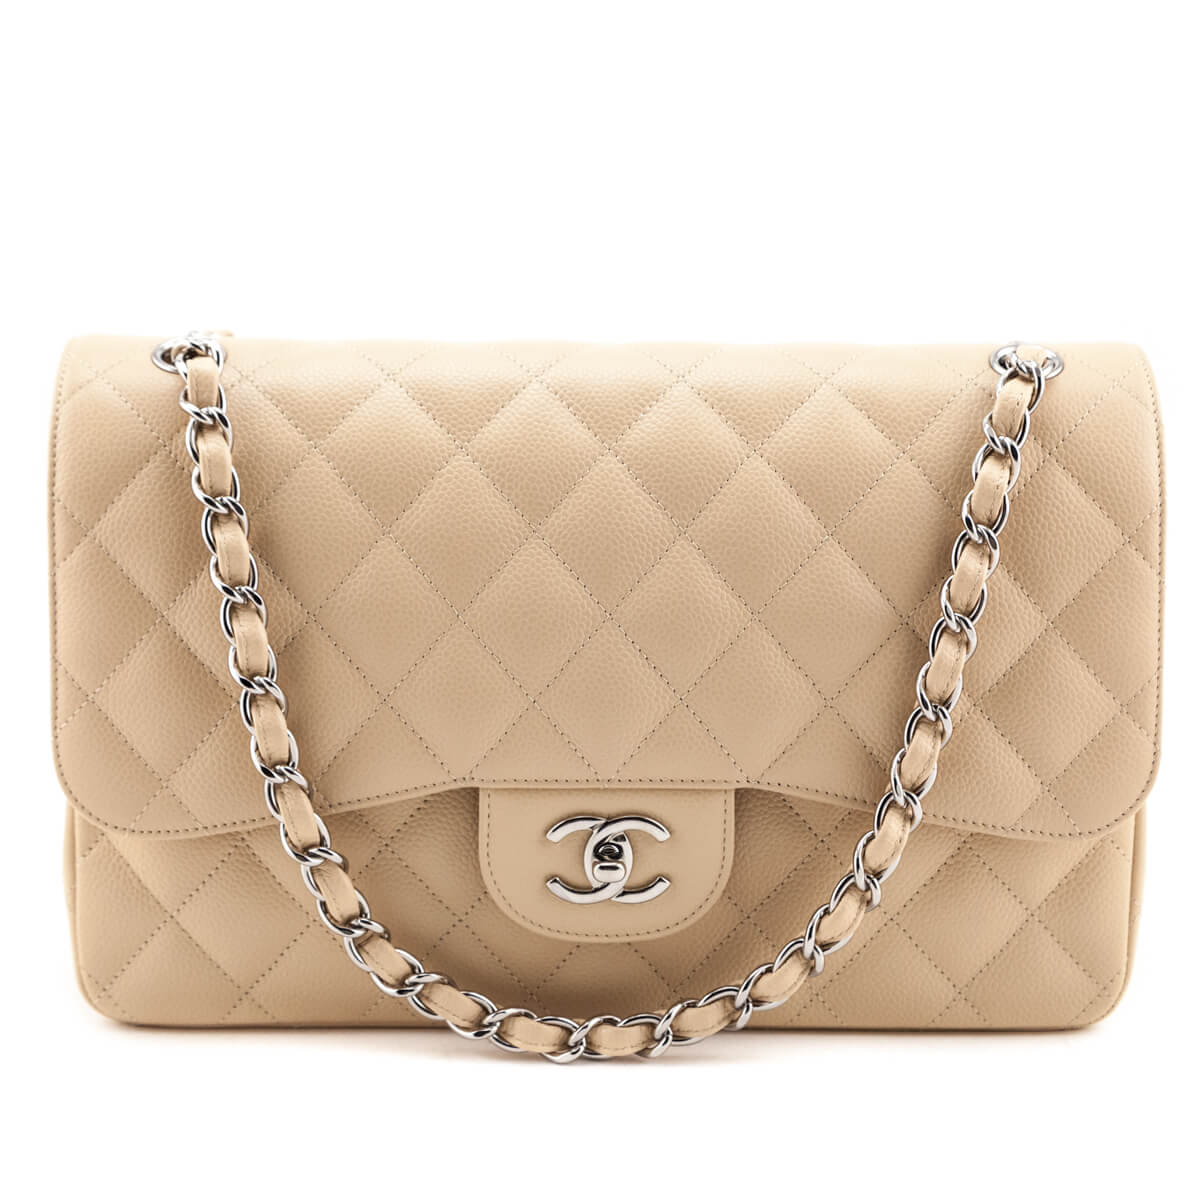 Chanel Beige Caviar Jumbo Double Flap Bag - Love that Bag etc - Preowned Authentic Designer Handbags & Preloved Fashions